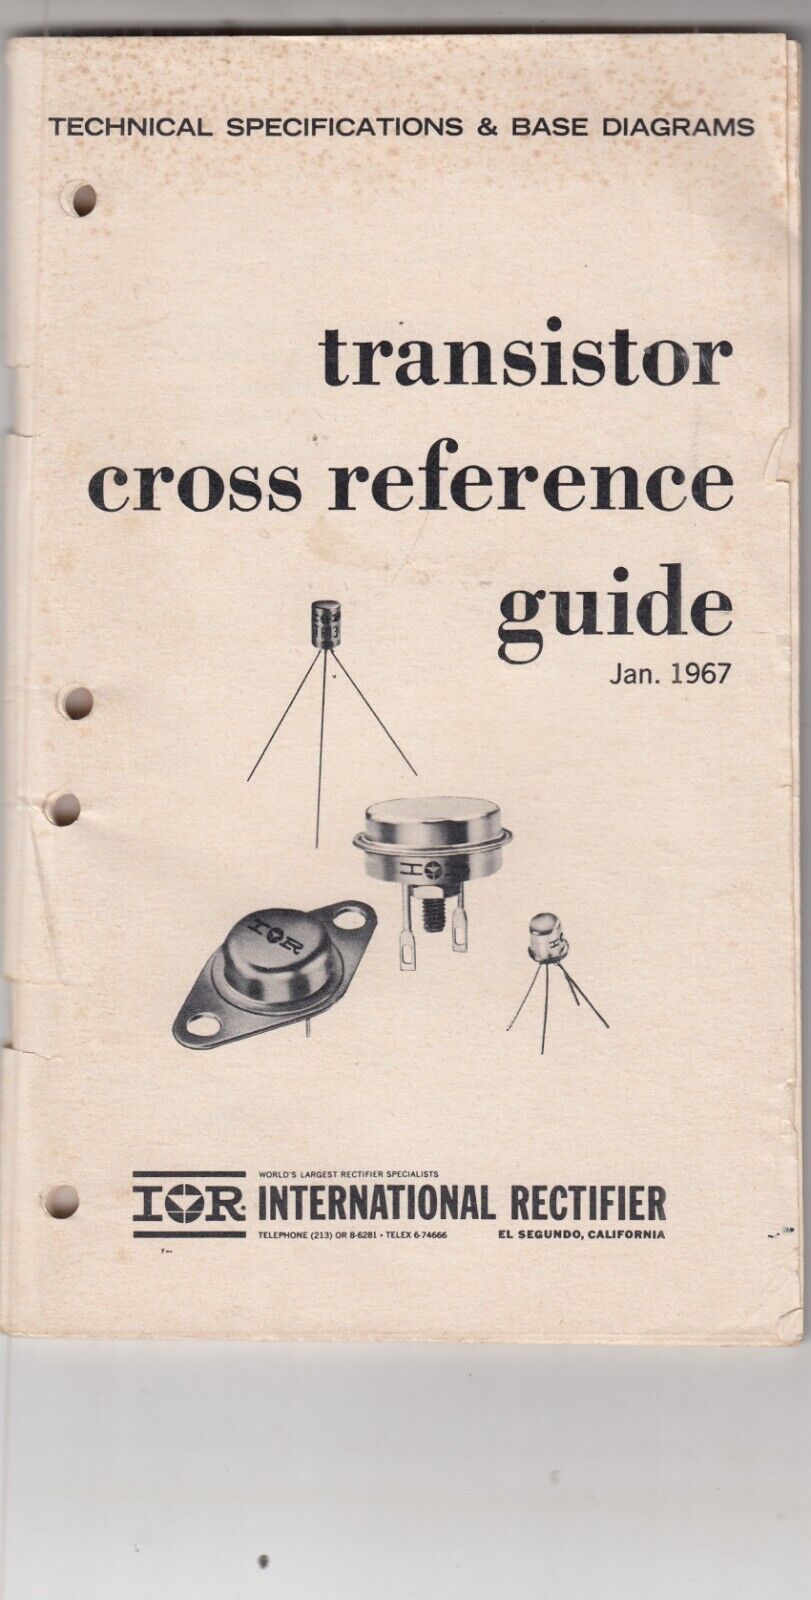 IOR INTERNATIONAL RECTIFIER TRANSISTER CROSS REFERENCE GUIDE 1967